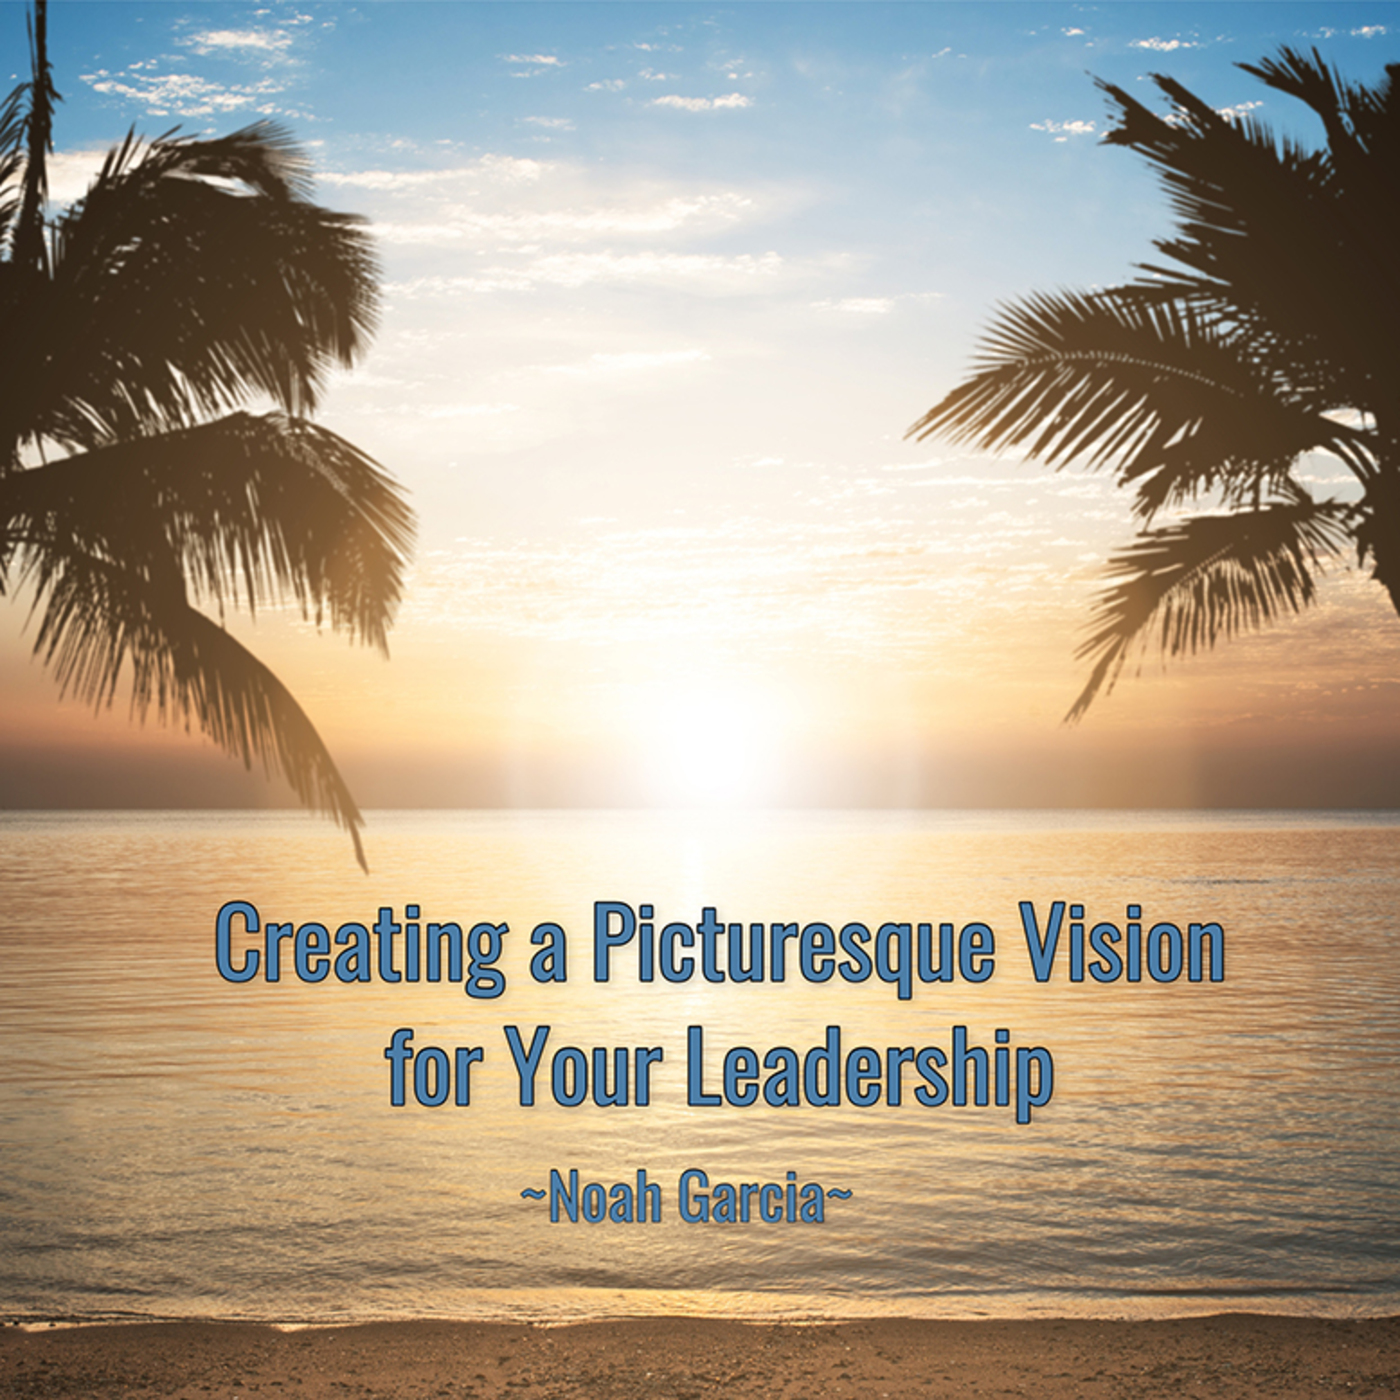 Creating a Picturesque Vision for Your Leadership